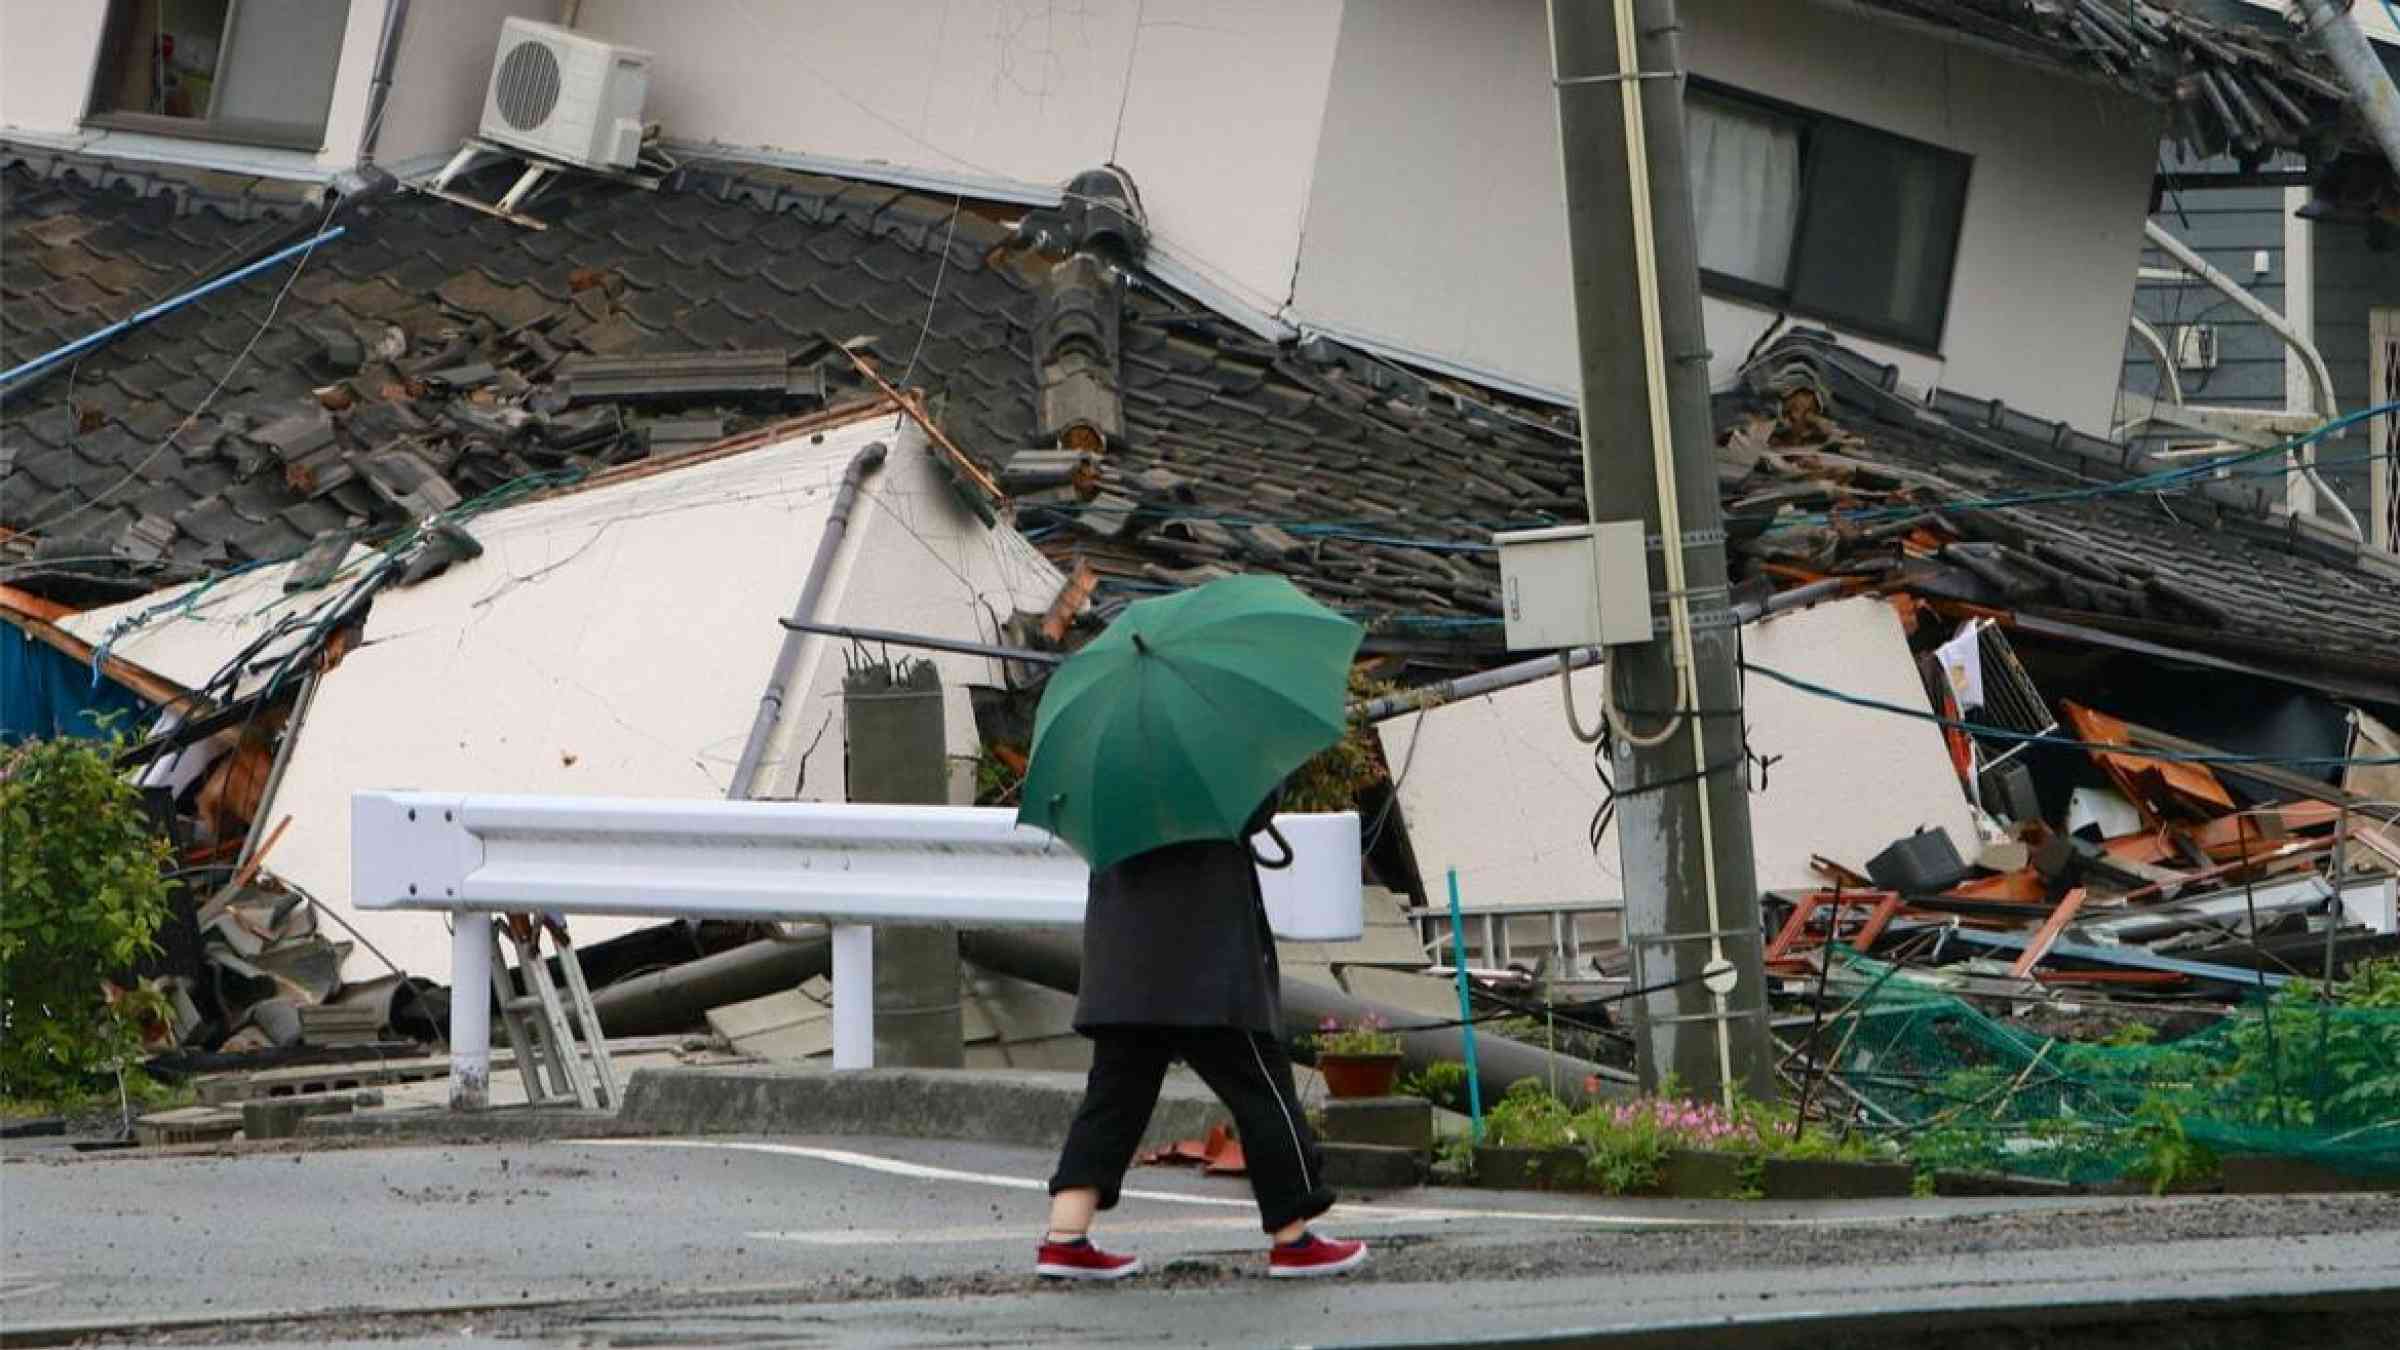 Japan Months Of Gravity Changes Preceded The Tōhoku Earthquake